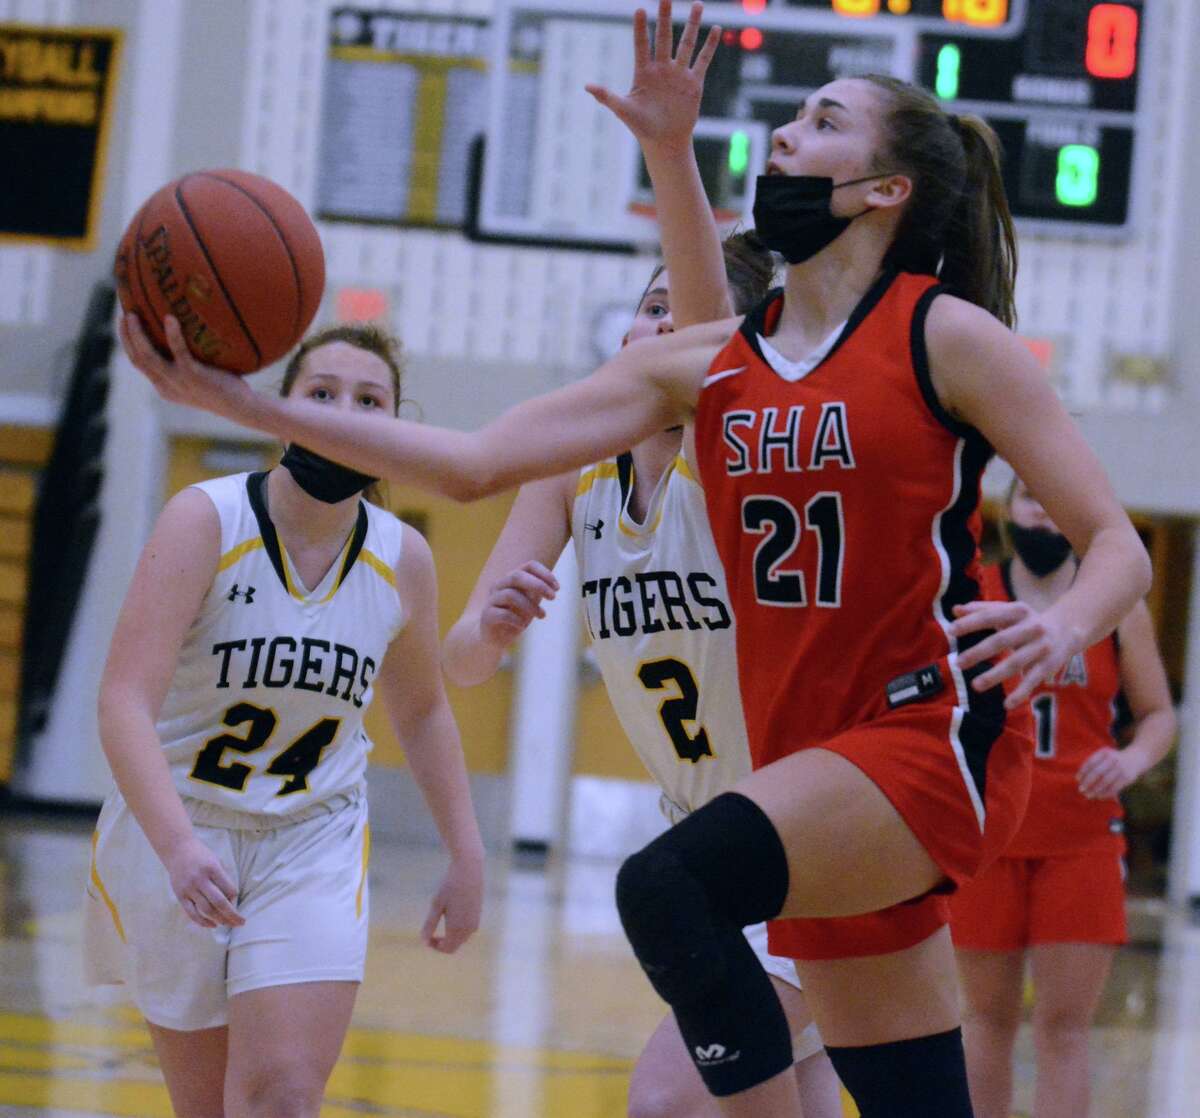 Rosa Rizzitelli of Sacred Heart Academy makes a scoop shot as Coco Rourke of Hand looks on during the Tigers' 39-36 win Monday night.